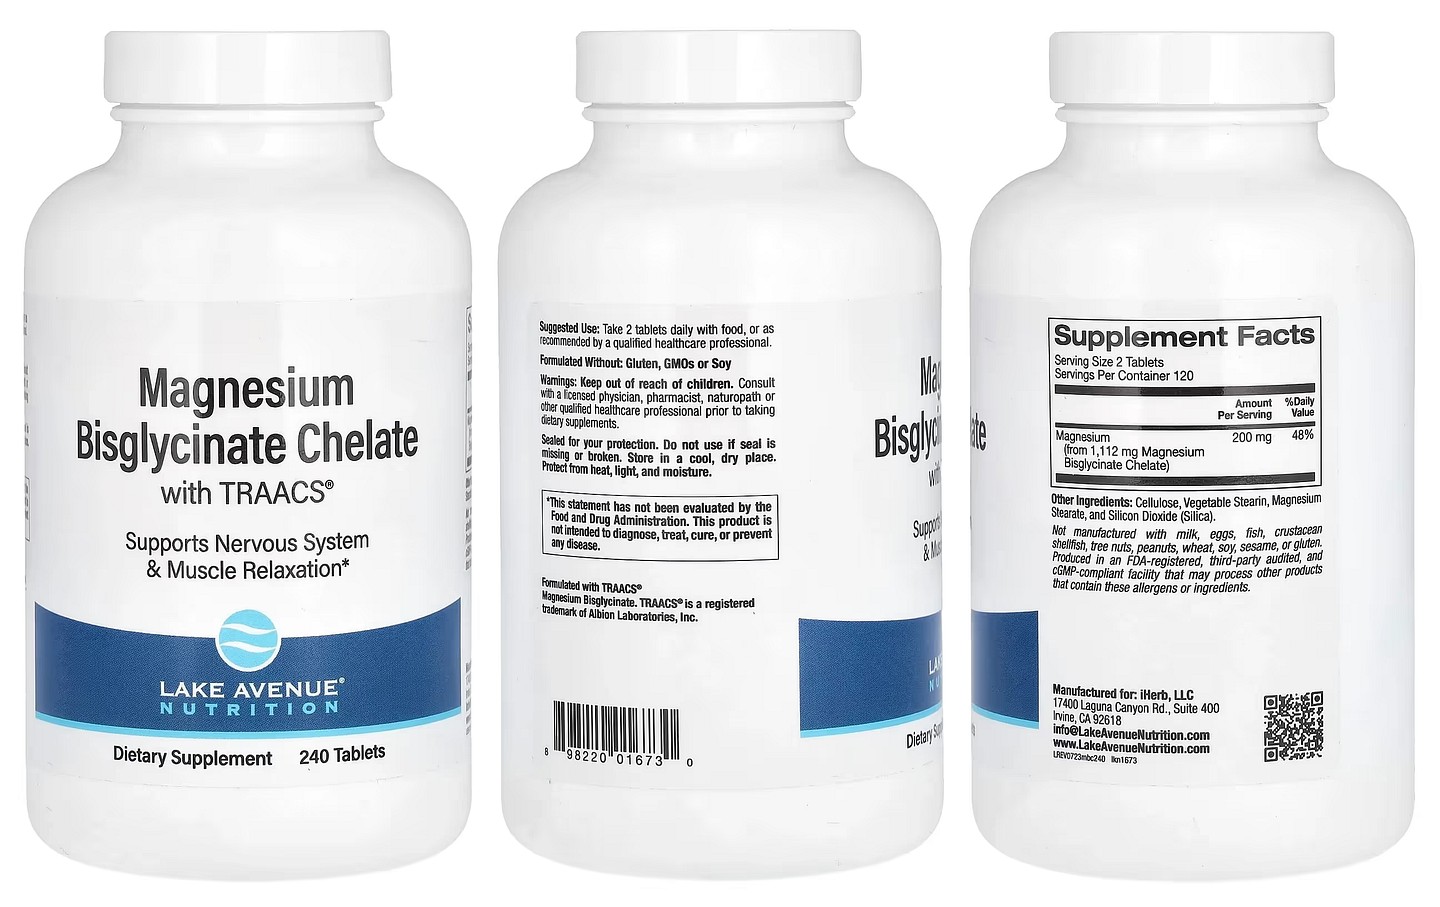 Lake Avenue Nutrition, Magnesium Bisglycinate Chelate with TRAACS® packaging